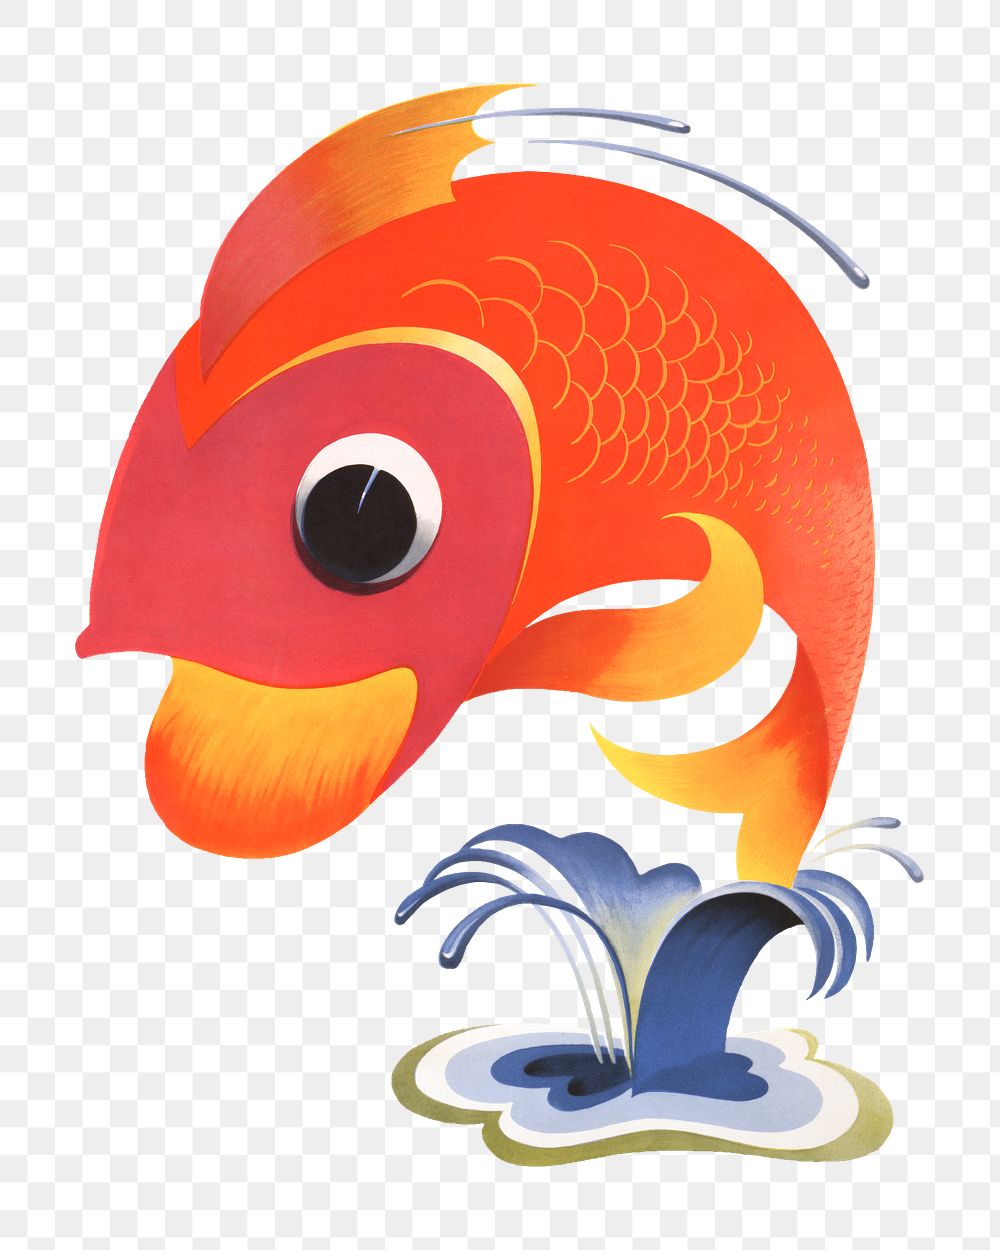 Jumping fish cartoon png sticker, animal illustration, transparent background.  Remixed by rawpixel.